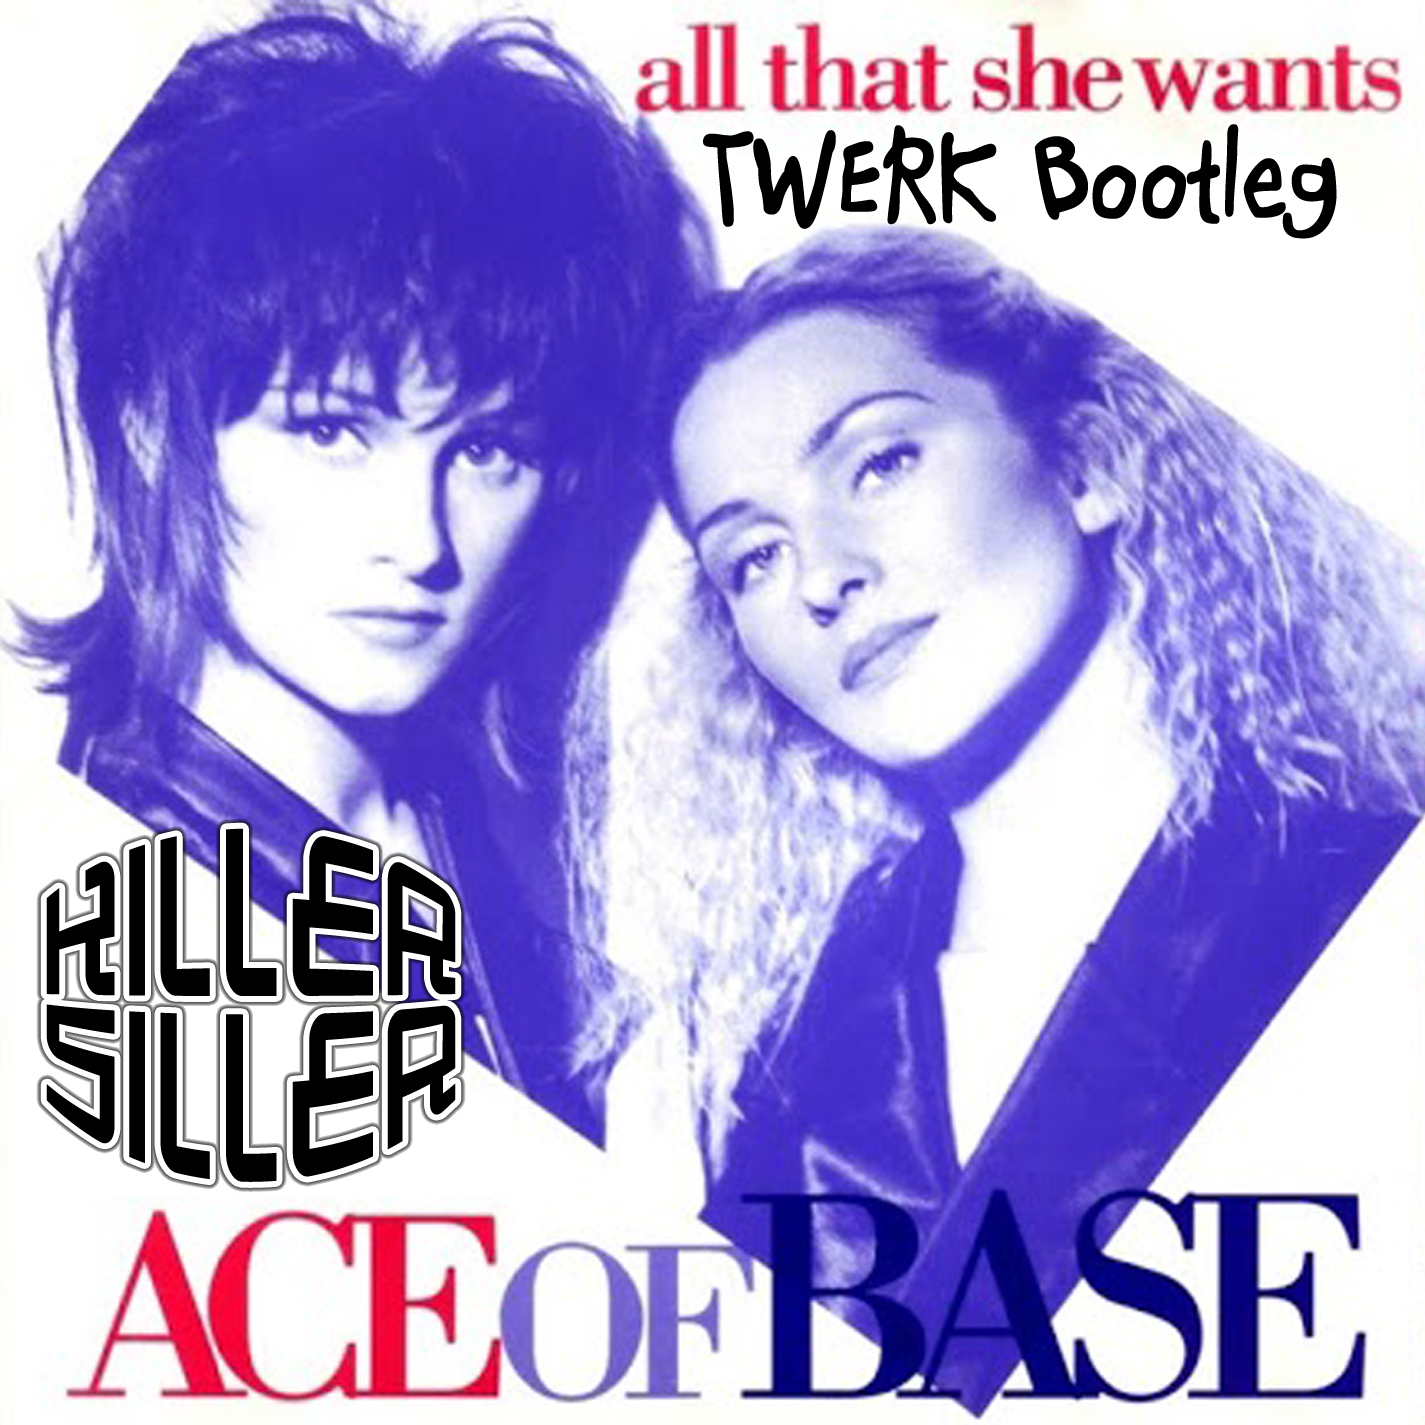 She wants на русском. Ace of Base all that she wants обложка. Ace of Base all that she wants альбом. Ace of Base 1992. Ace of Base all want she wants.